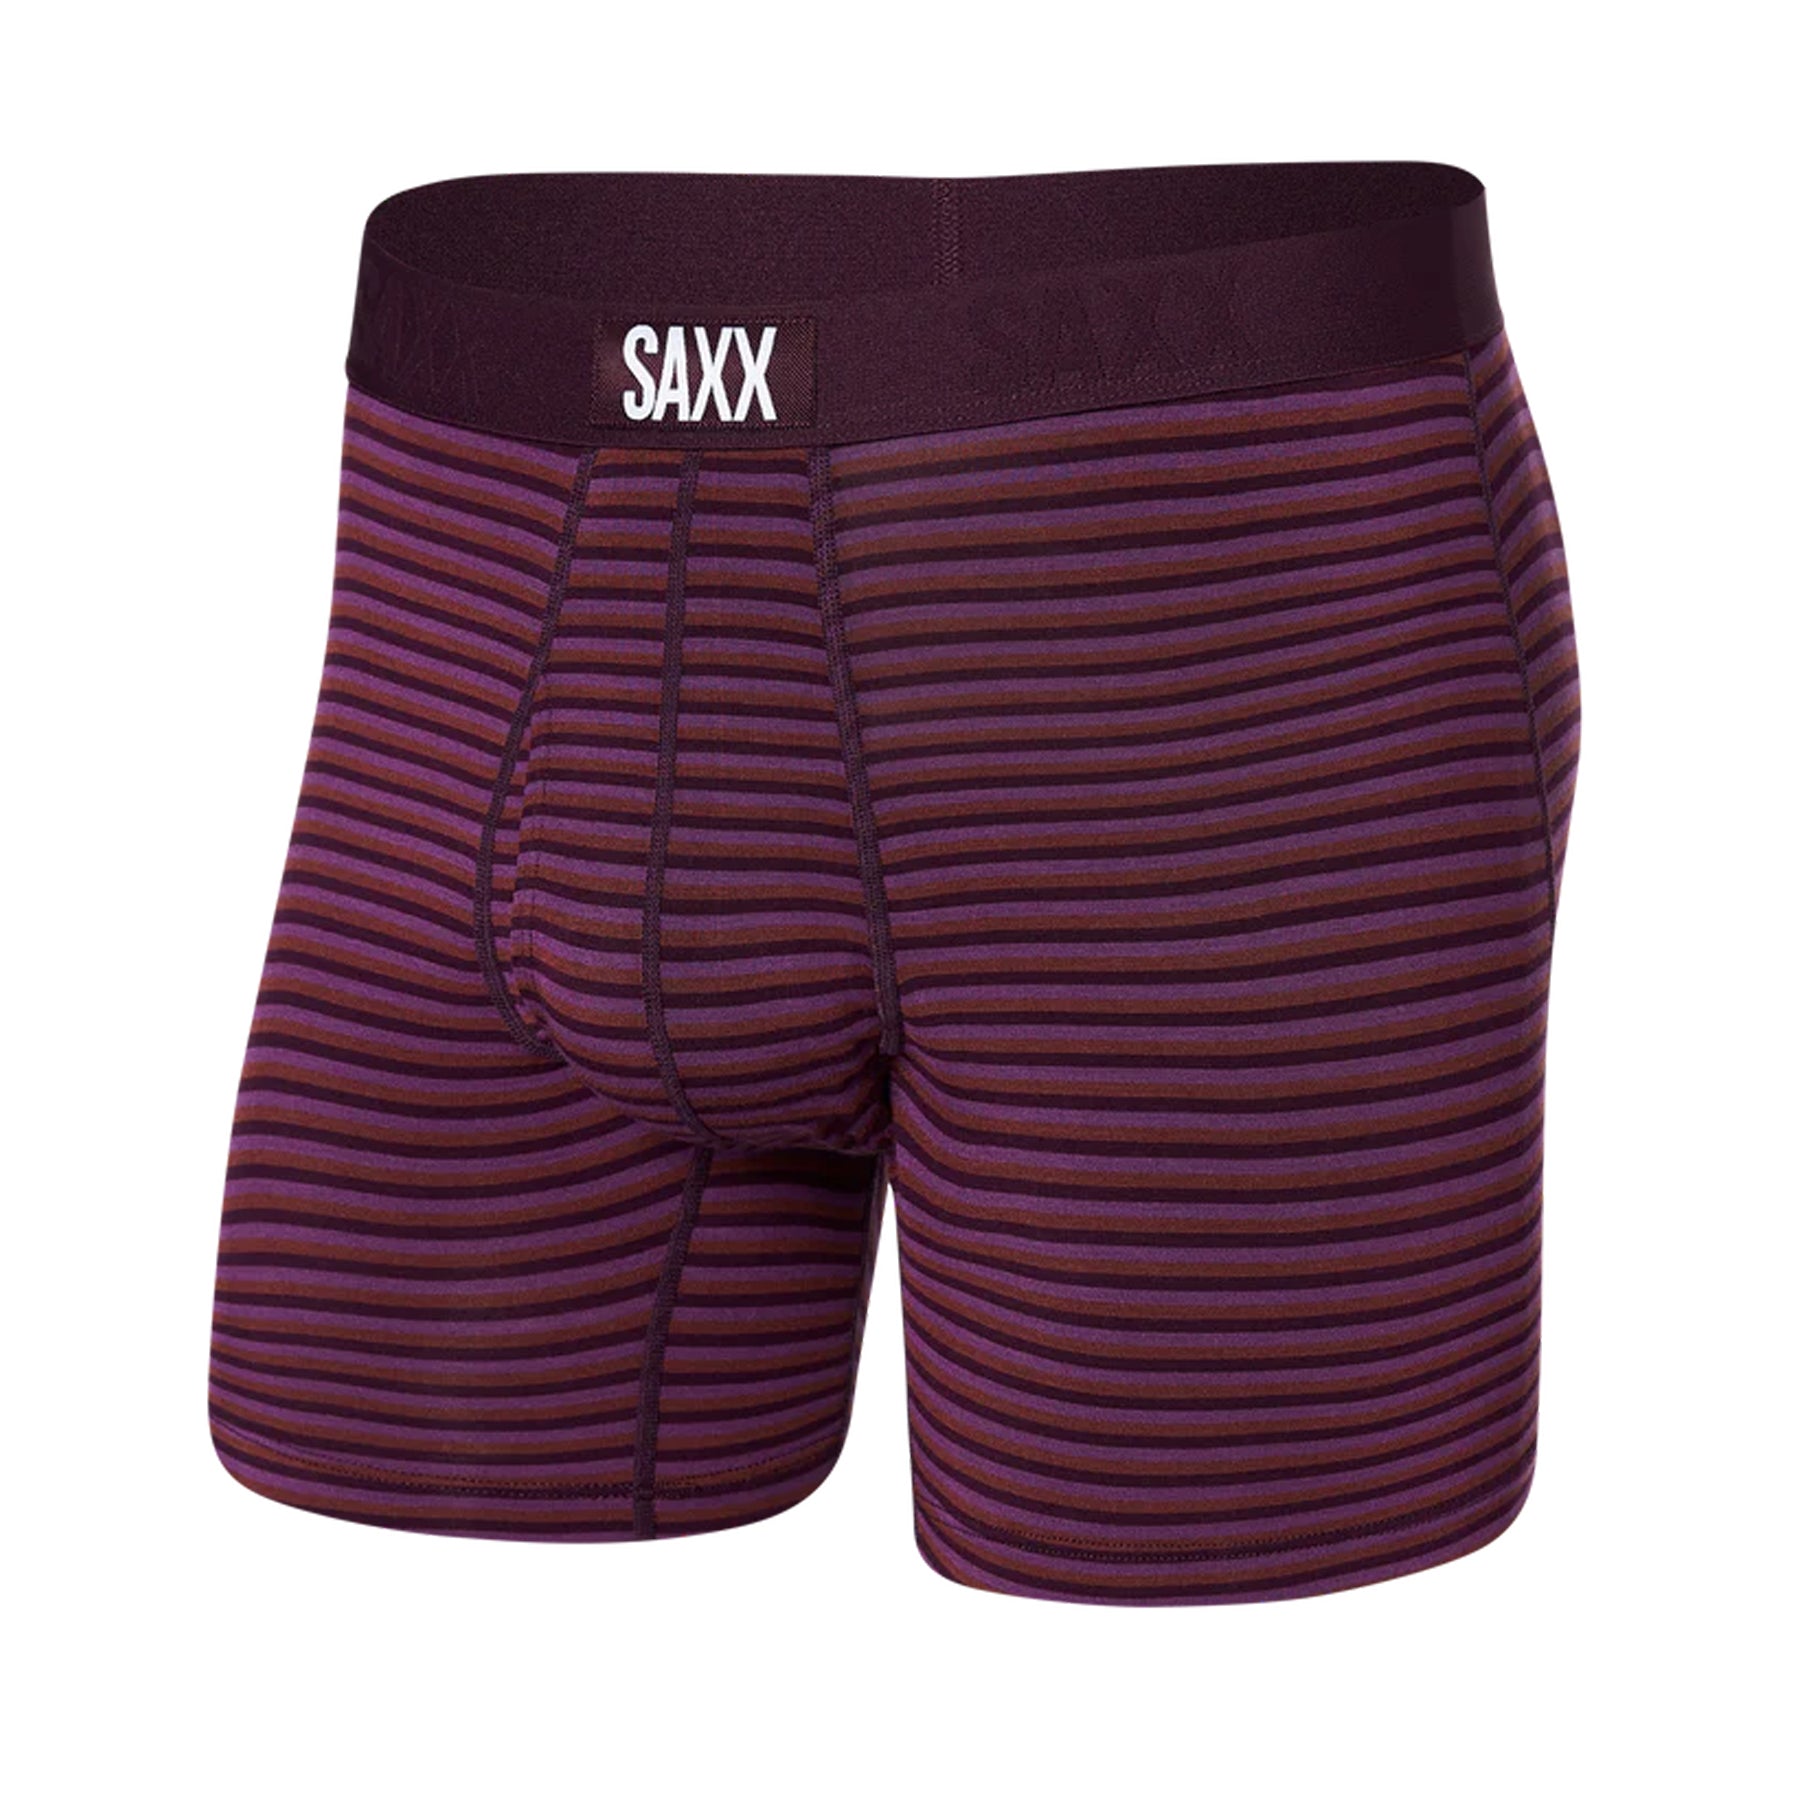 Boxer Brief w/ Fly